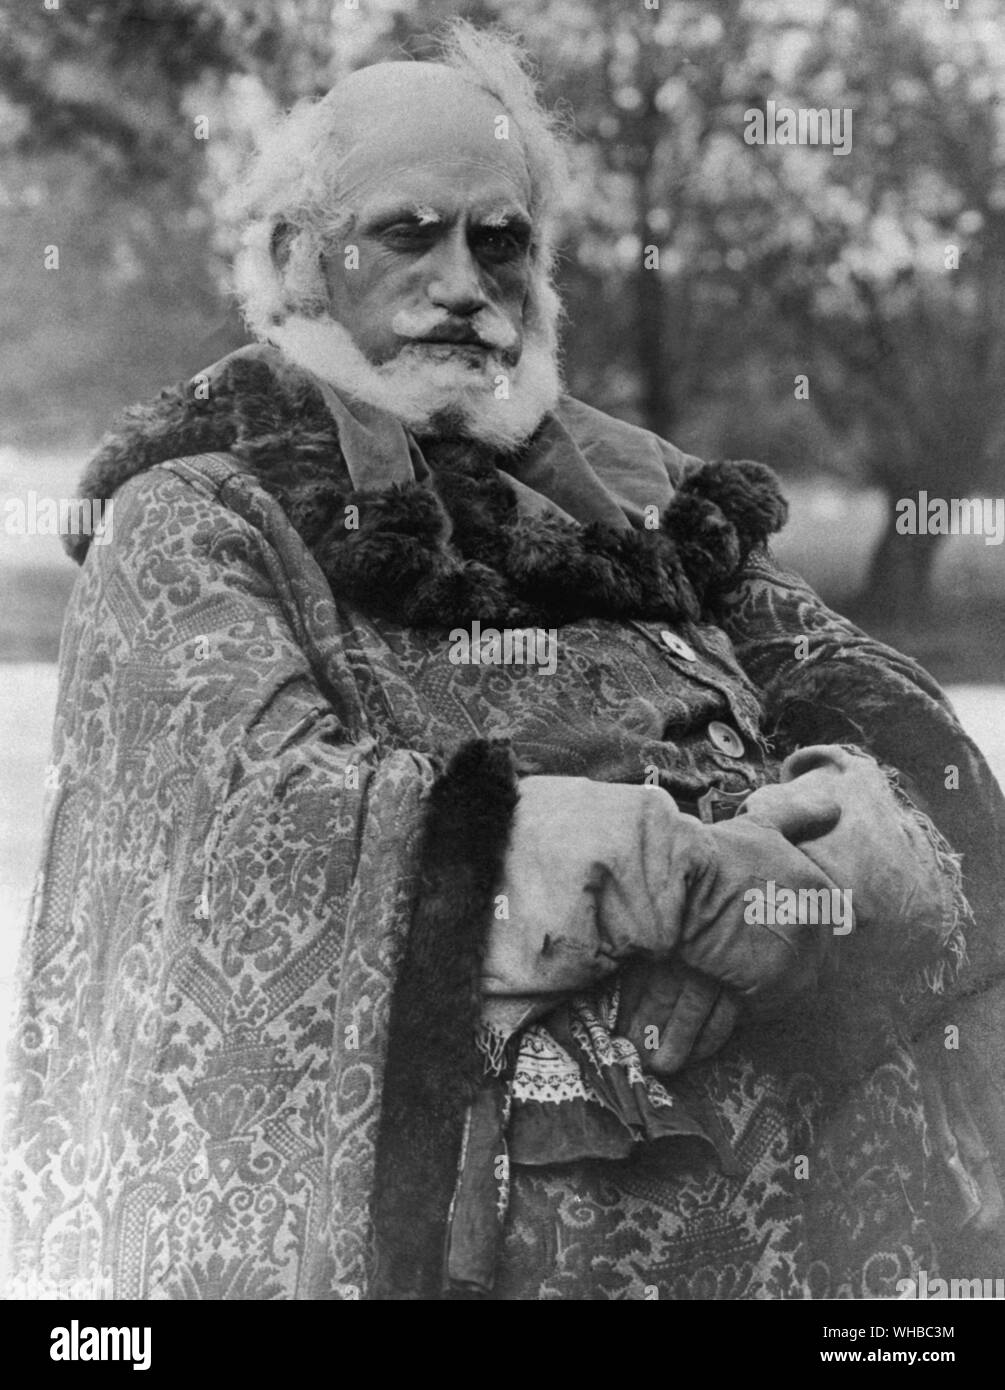 Merry Wives 1921. Baliol Holloway as Falstaff. Royal Shakespeare Theatre Stratford upon Avon Stock Photo